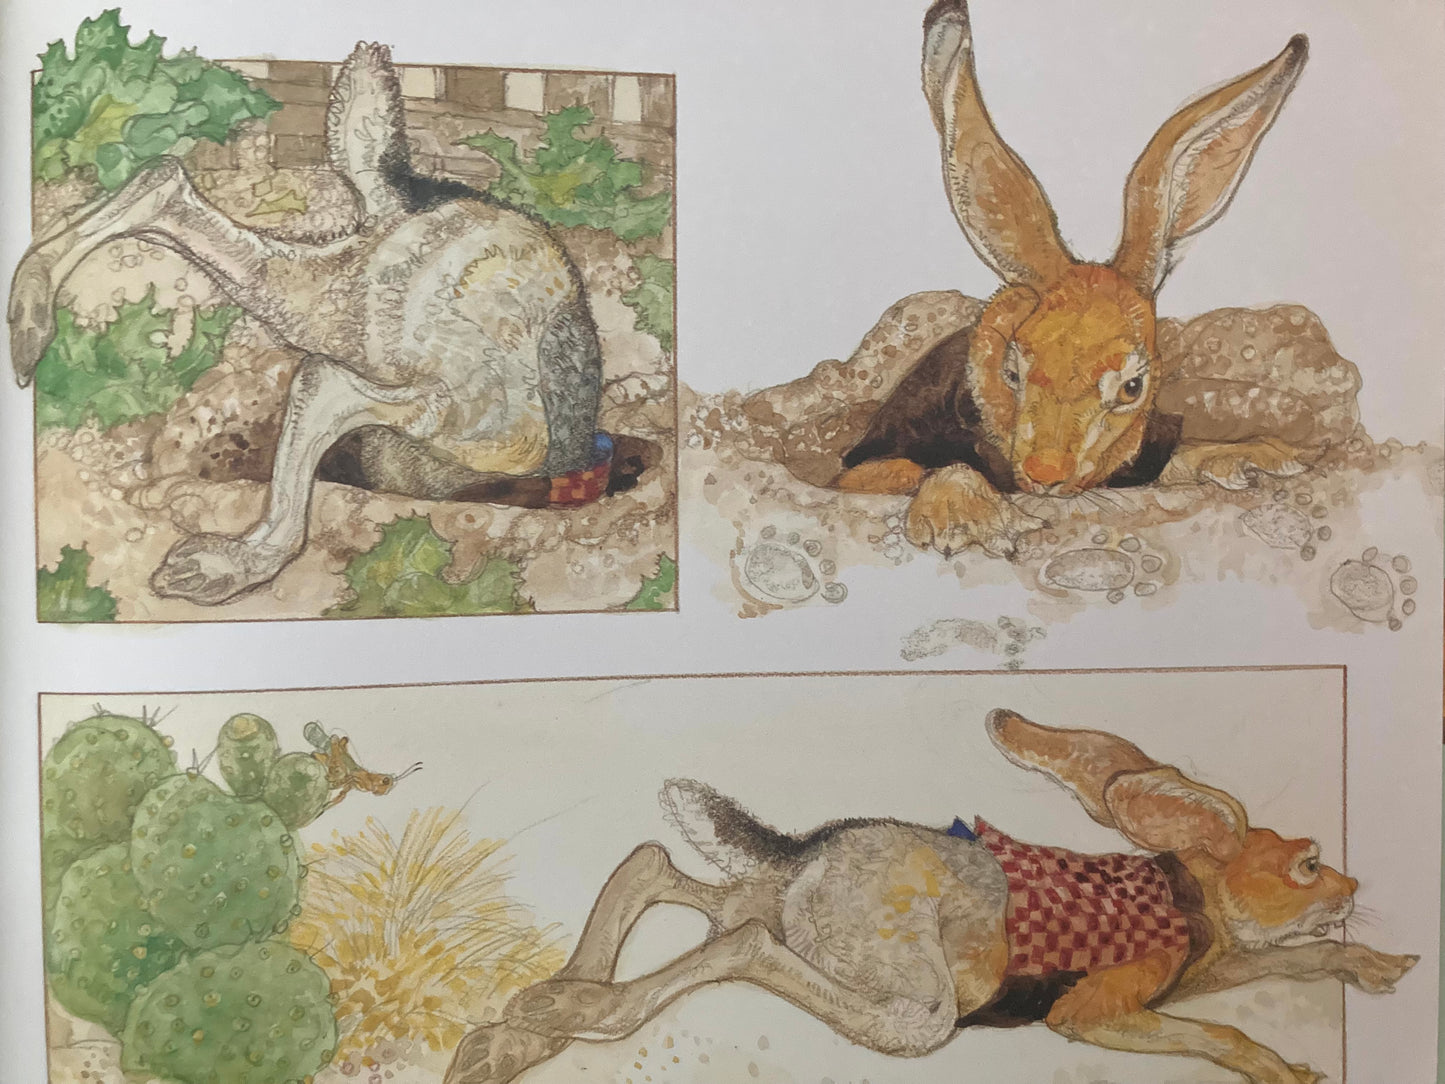 Children's FairyTales & Fables - THE TORTOISE AND THE HARE